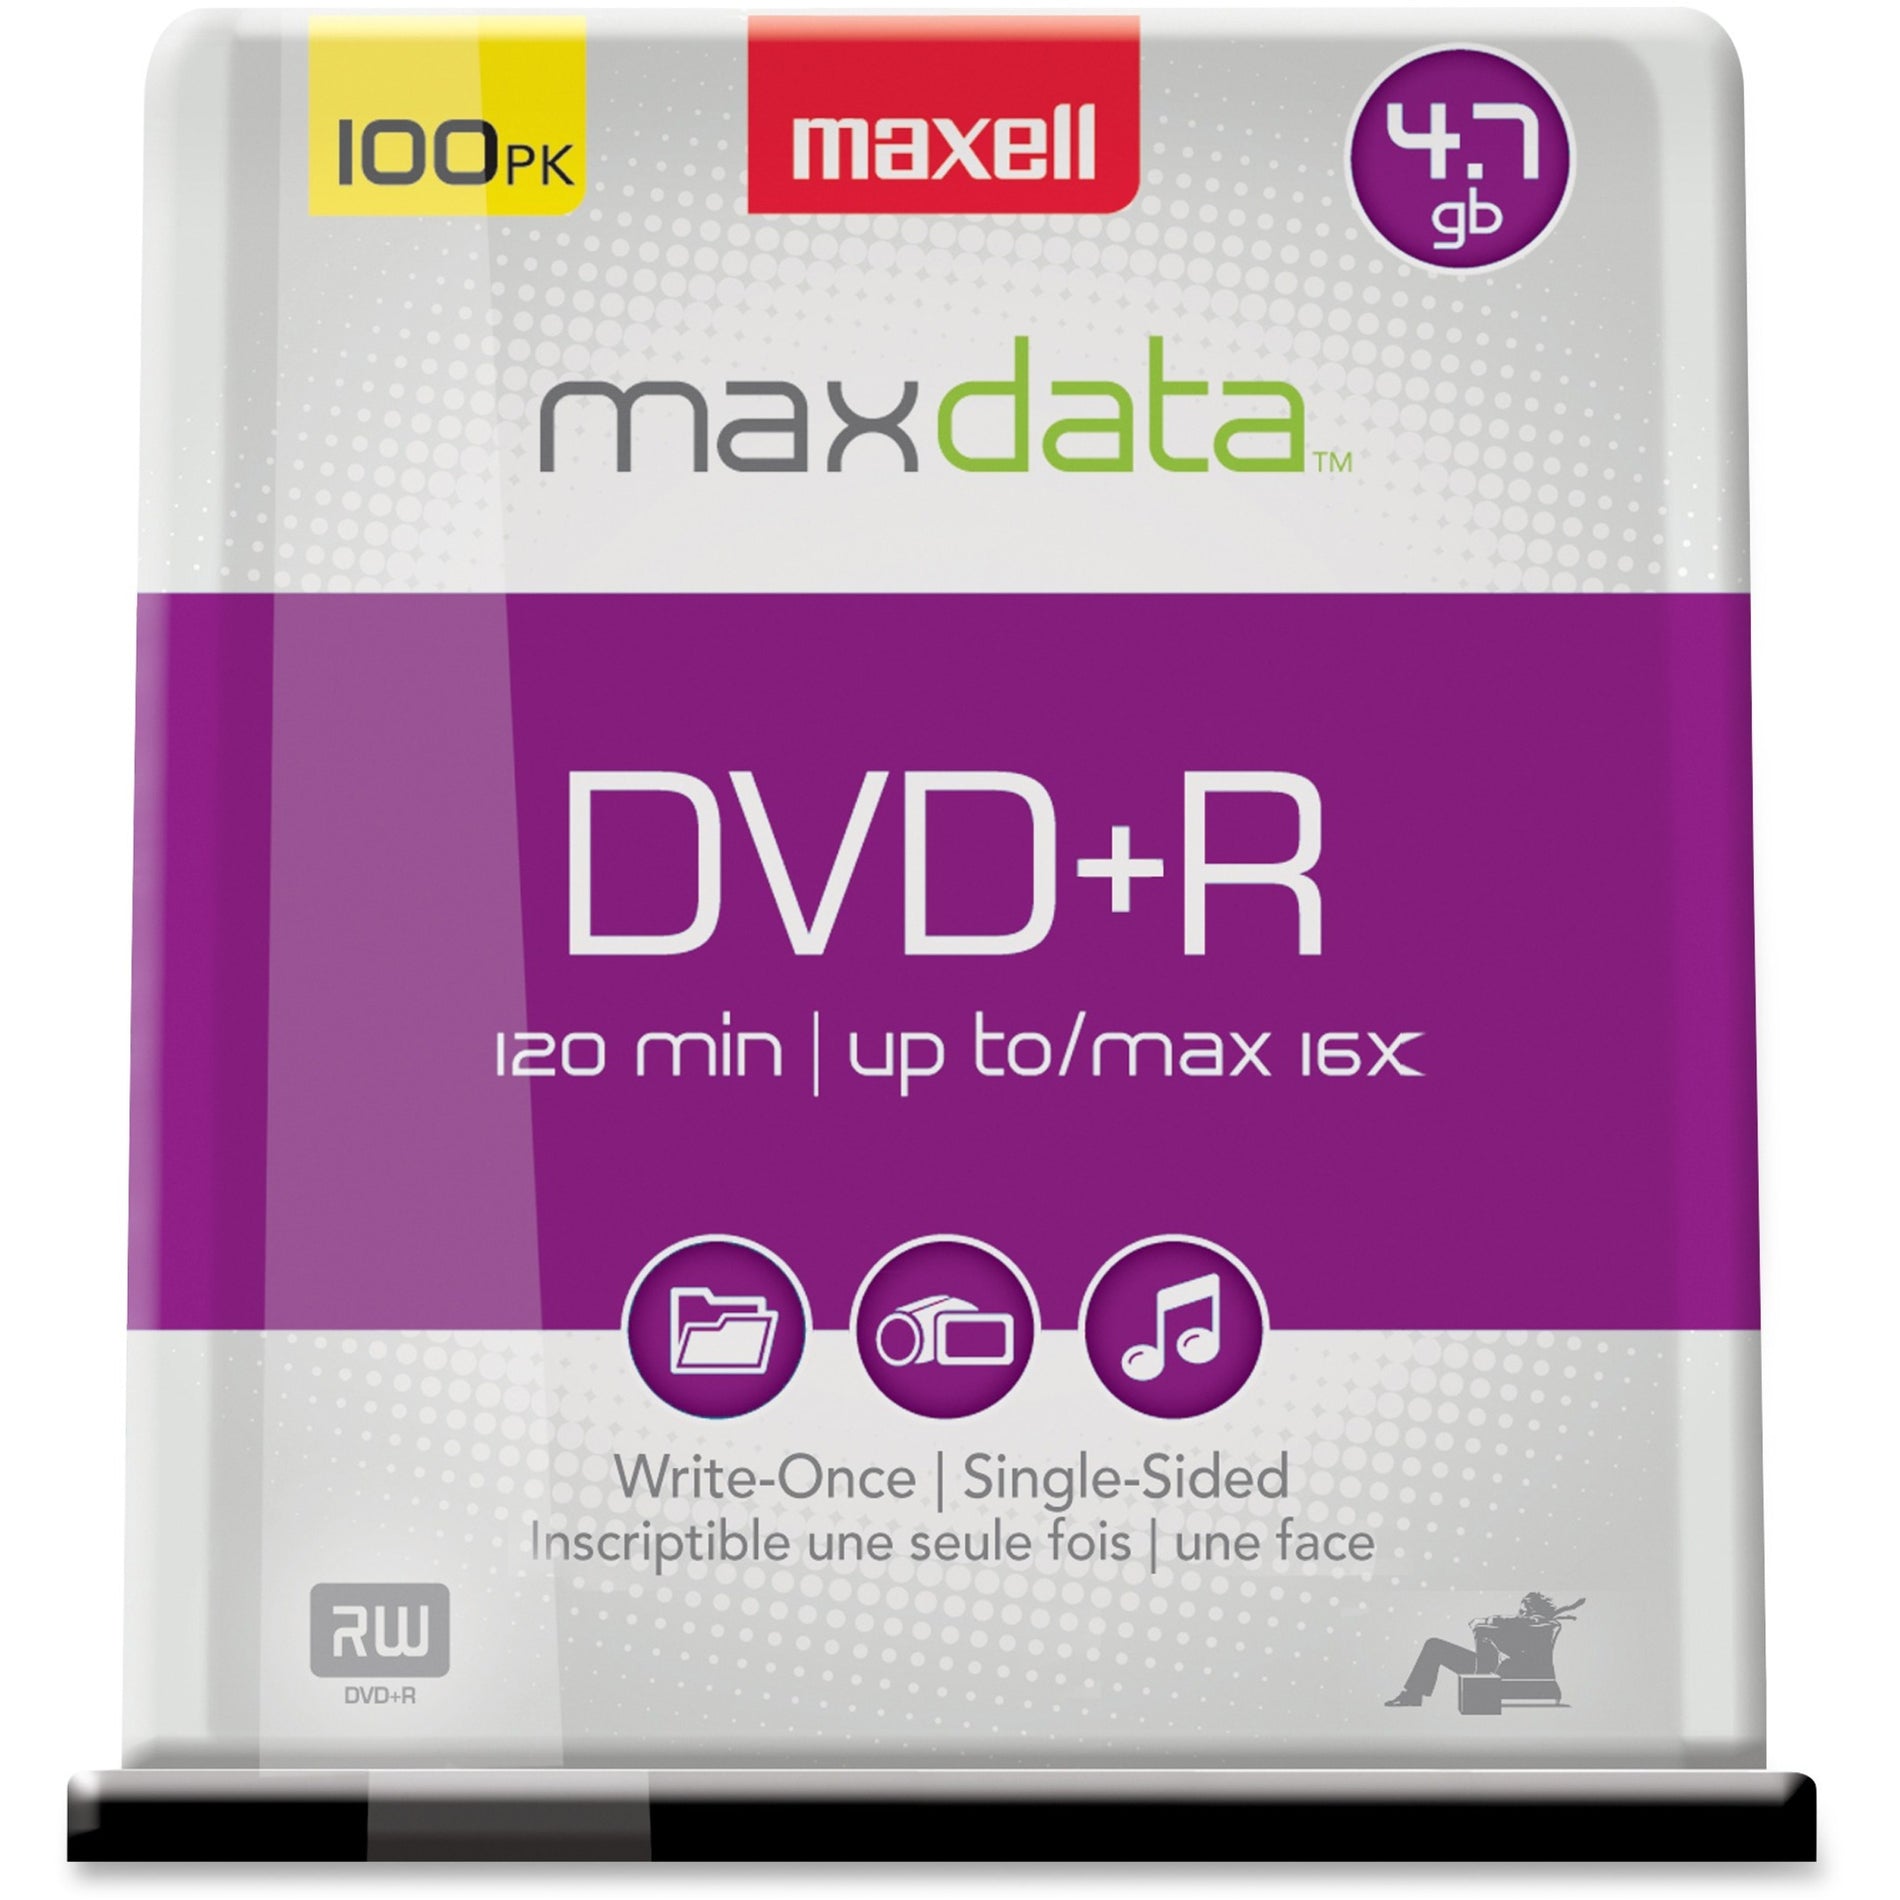 Maxell 16x DVD+R Media - 120mm [Discontinued]